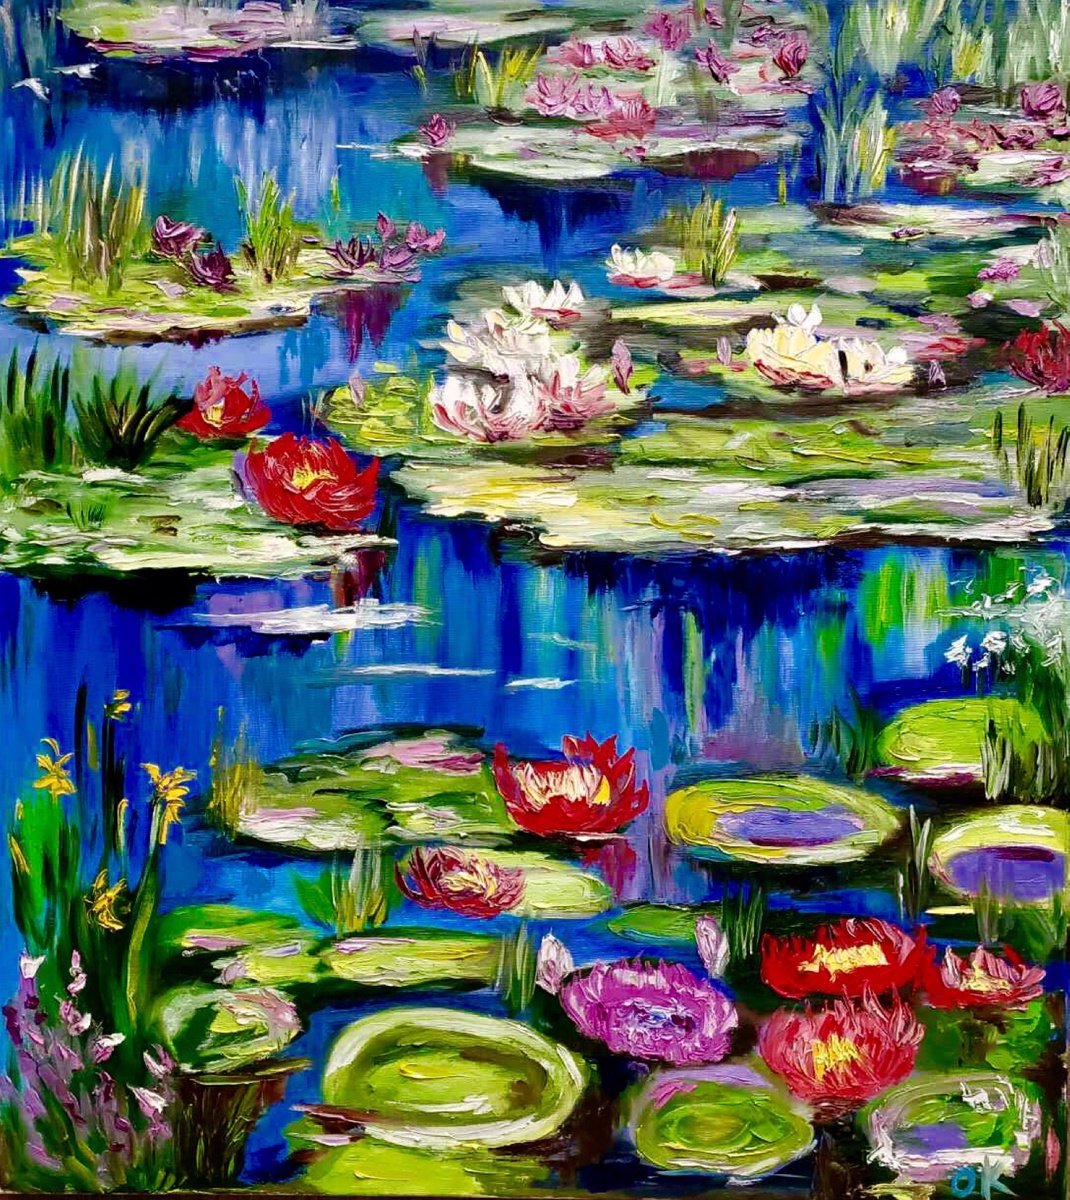 Pond of Claude Monet in Giverny in summer bloom, water lilies, irises by Olga Koval